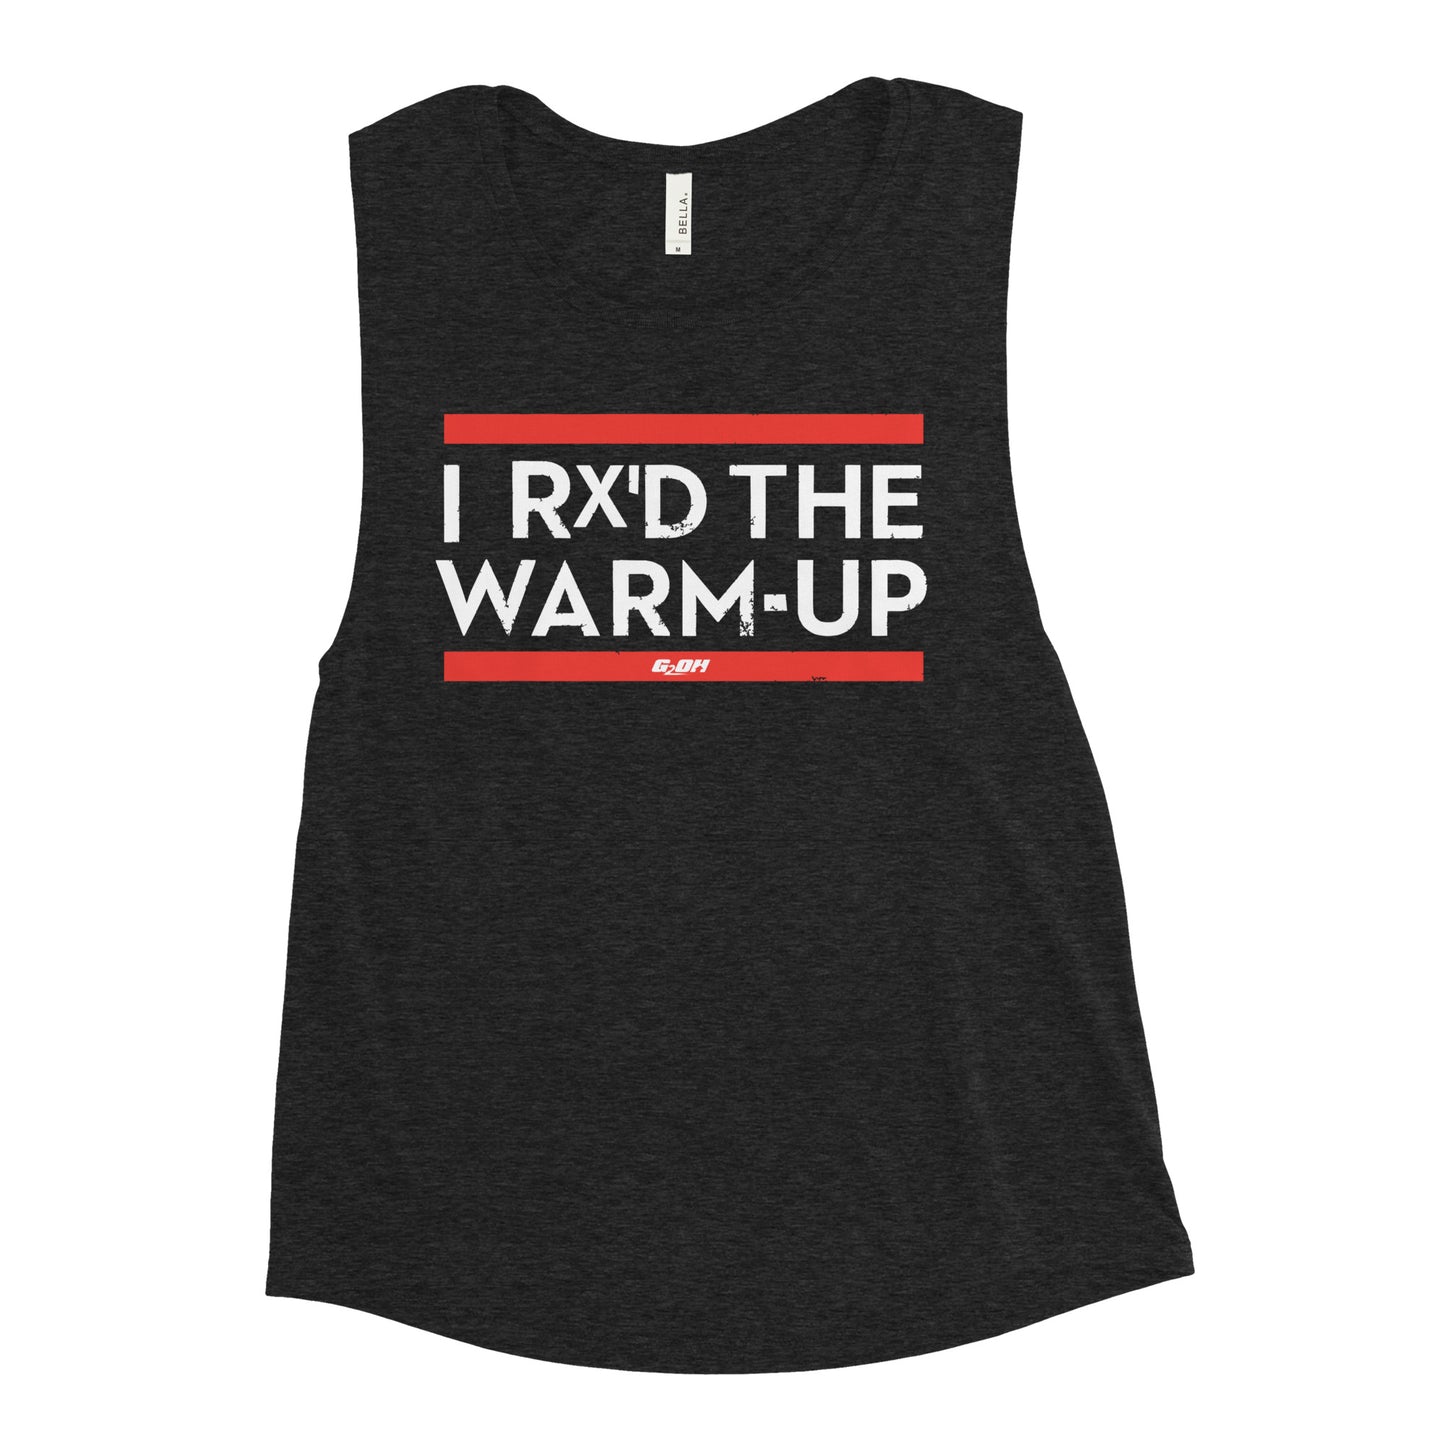 I Rx'd The Warm-Up Women's Muscle Tank